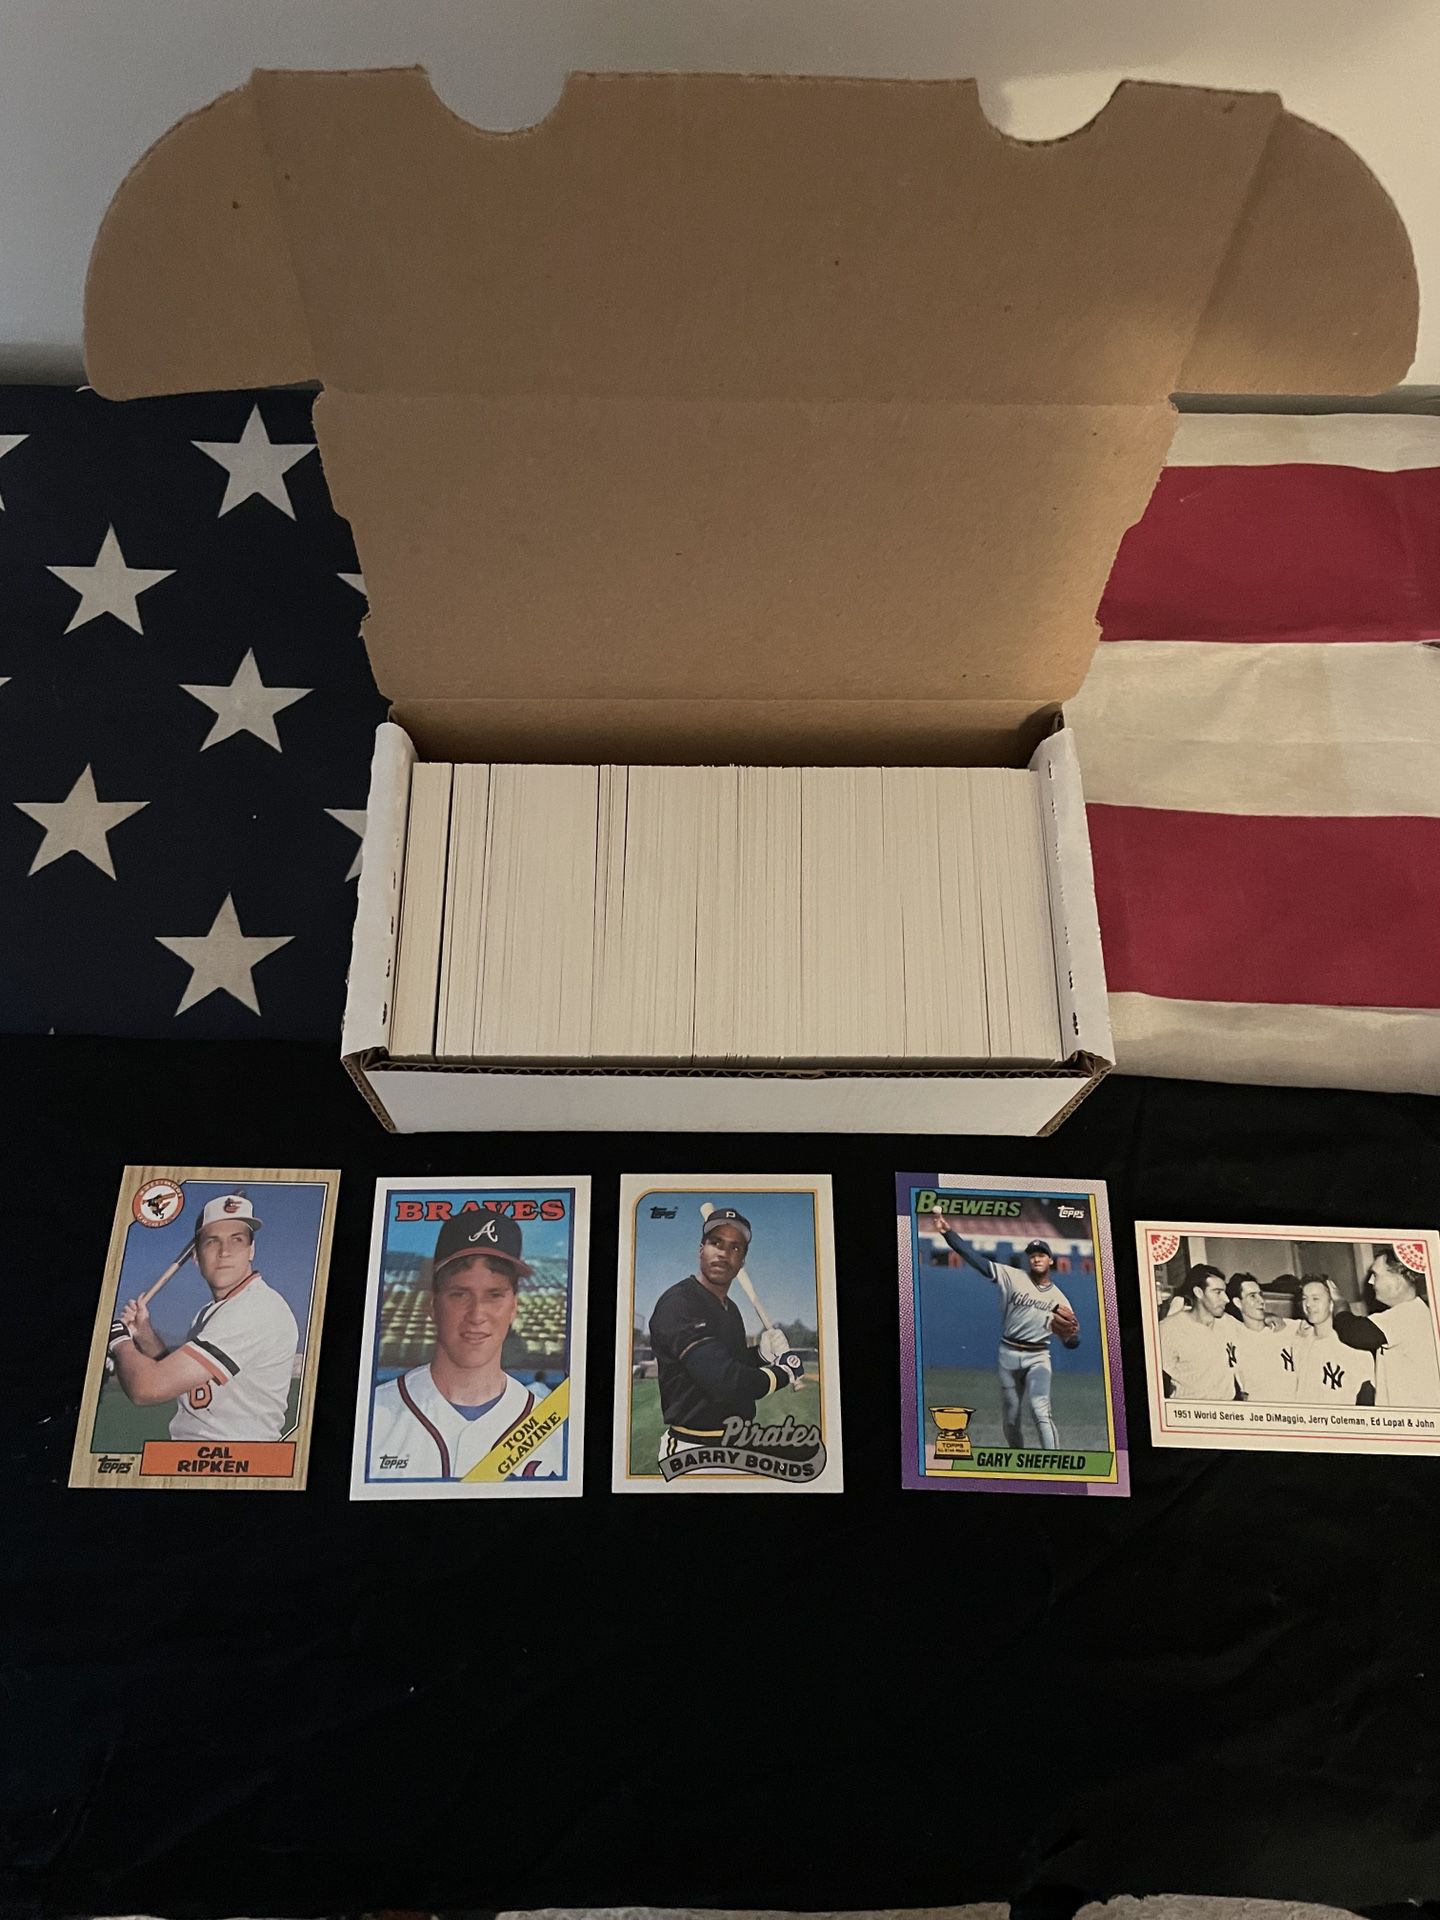 $8.99 PER BOX OF 350 ⚾️BASEBALL CARDS🔥👙 1987,88,89,90,91 - CARDS SHOWN R INCLUDED!!! 👙ALL CARDS NEAR MINT-XLNT!🔥70 CARDS FROM EACH YEAR INCLUDED